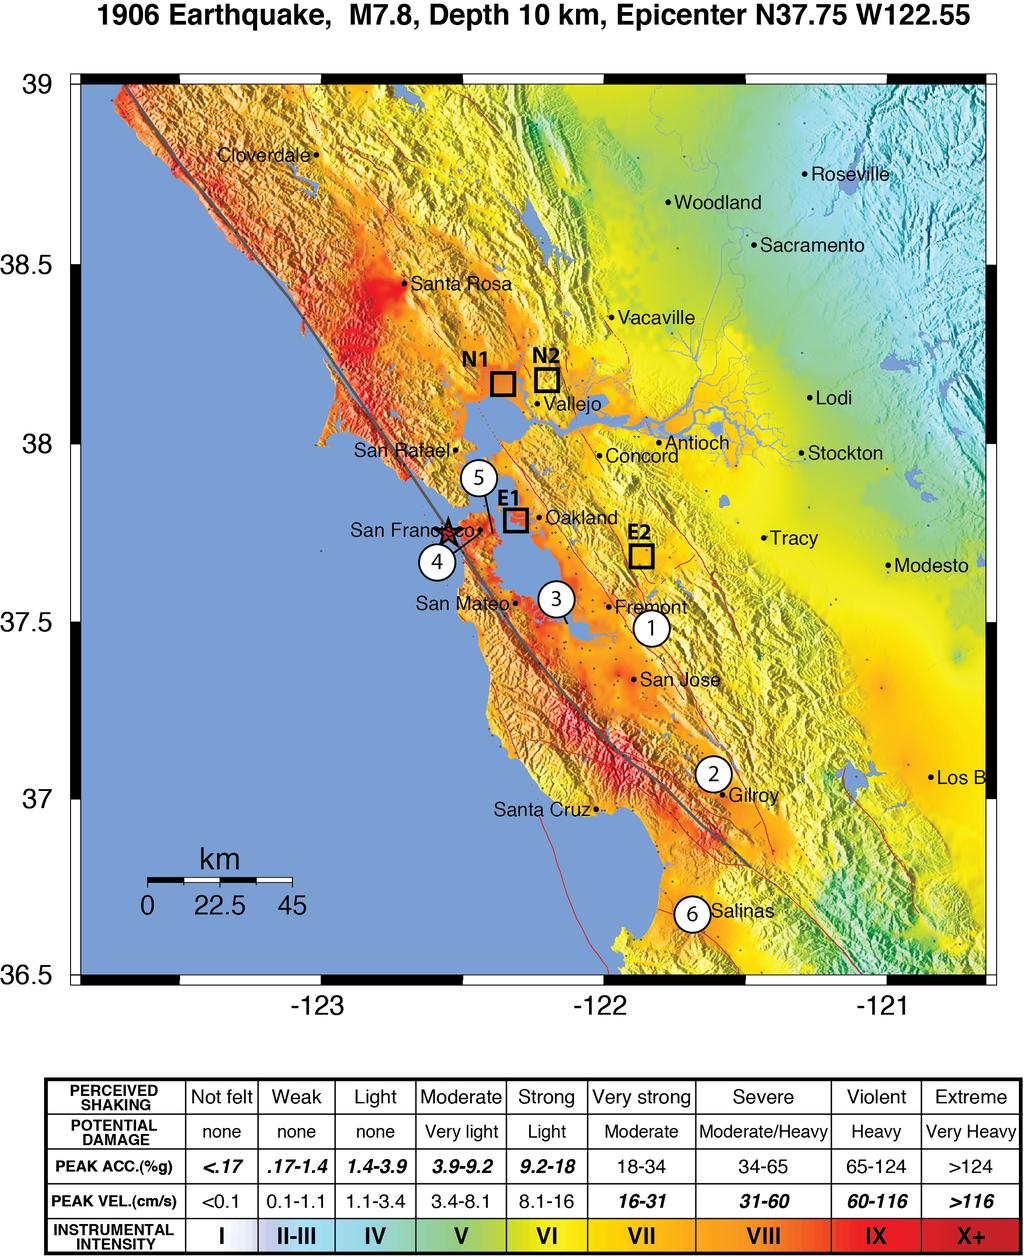 InTeGrate: Living on the Edge Unit 2: Risk at Transform Plate Boundaries Shakemap for 1906